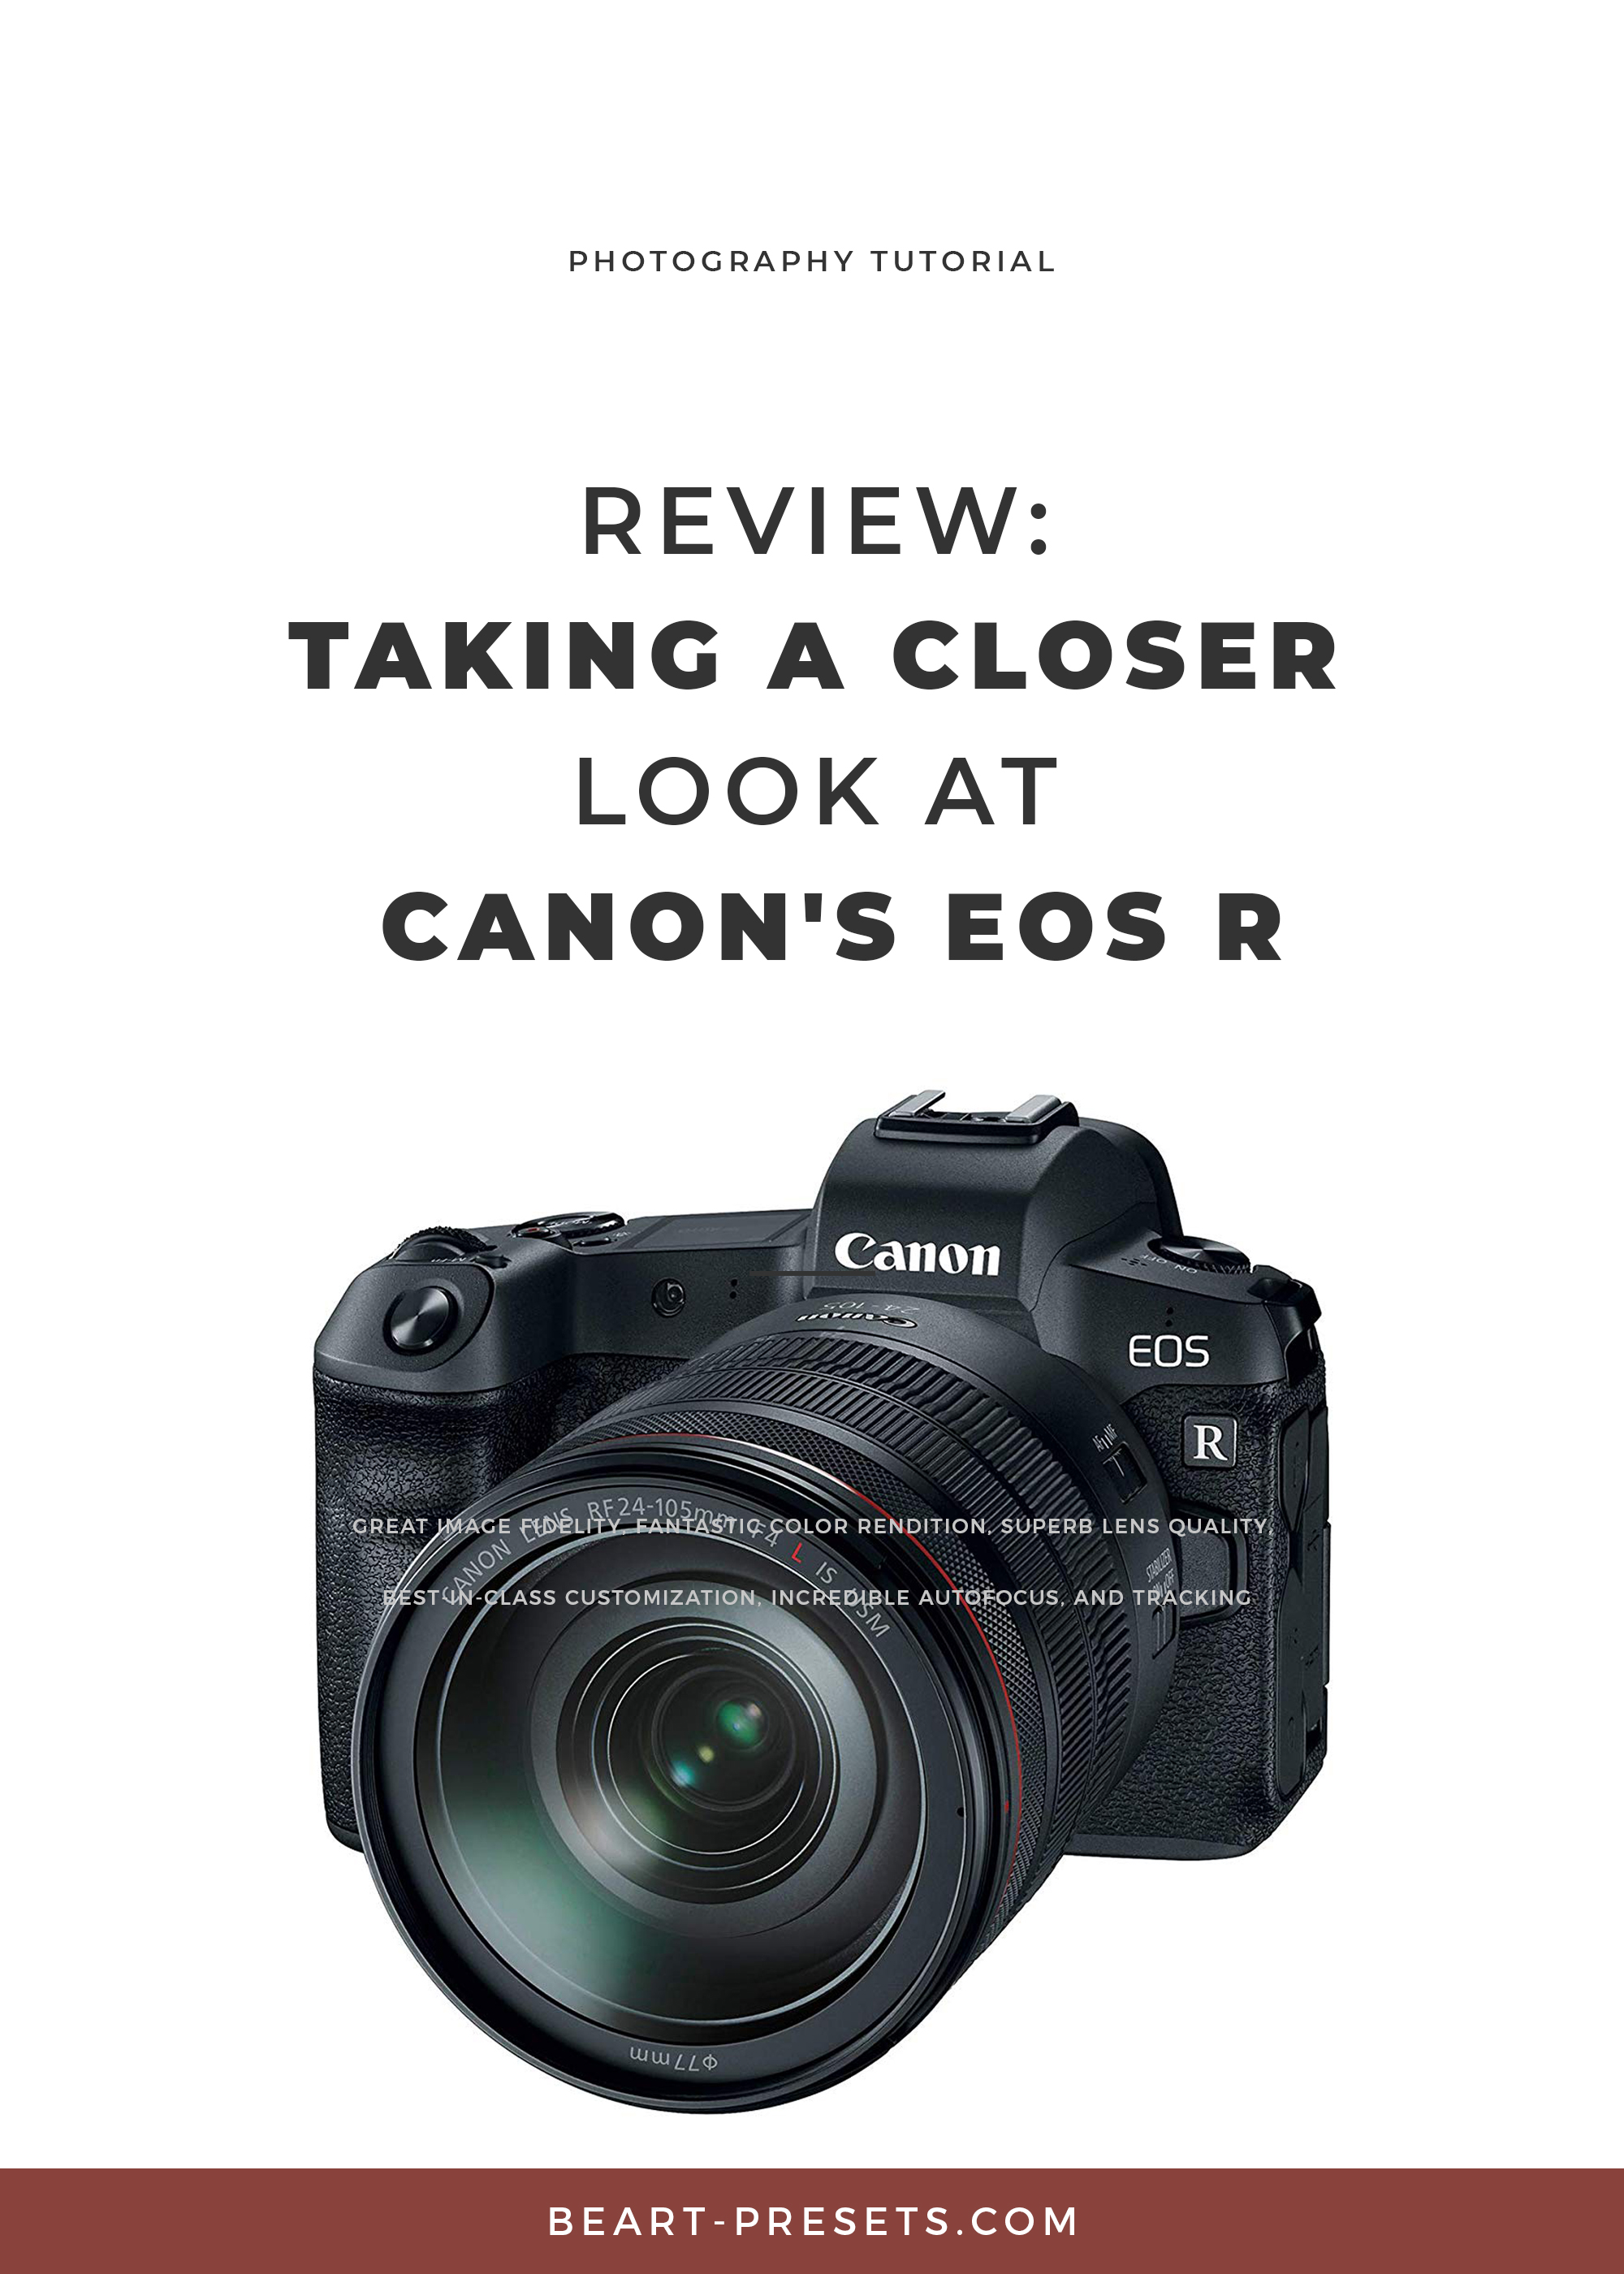 Canon EOS R – electronic viewfinder 36 mm sensor. Camera Review